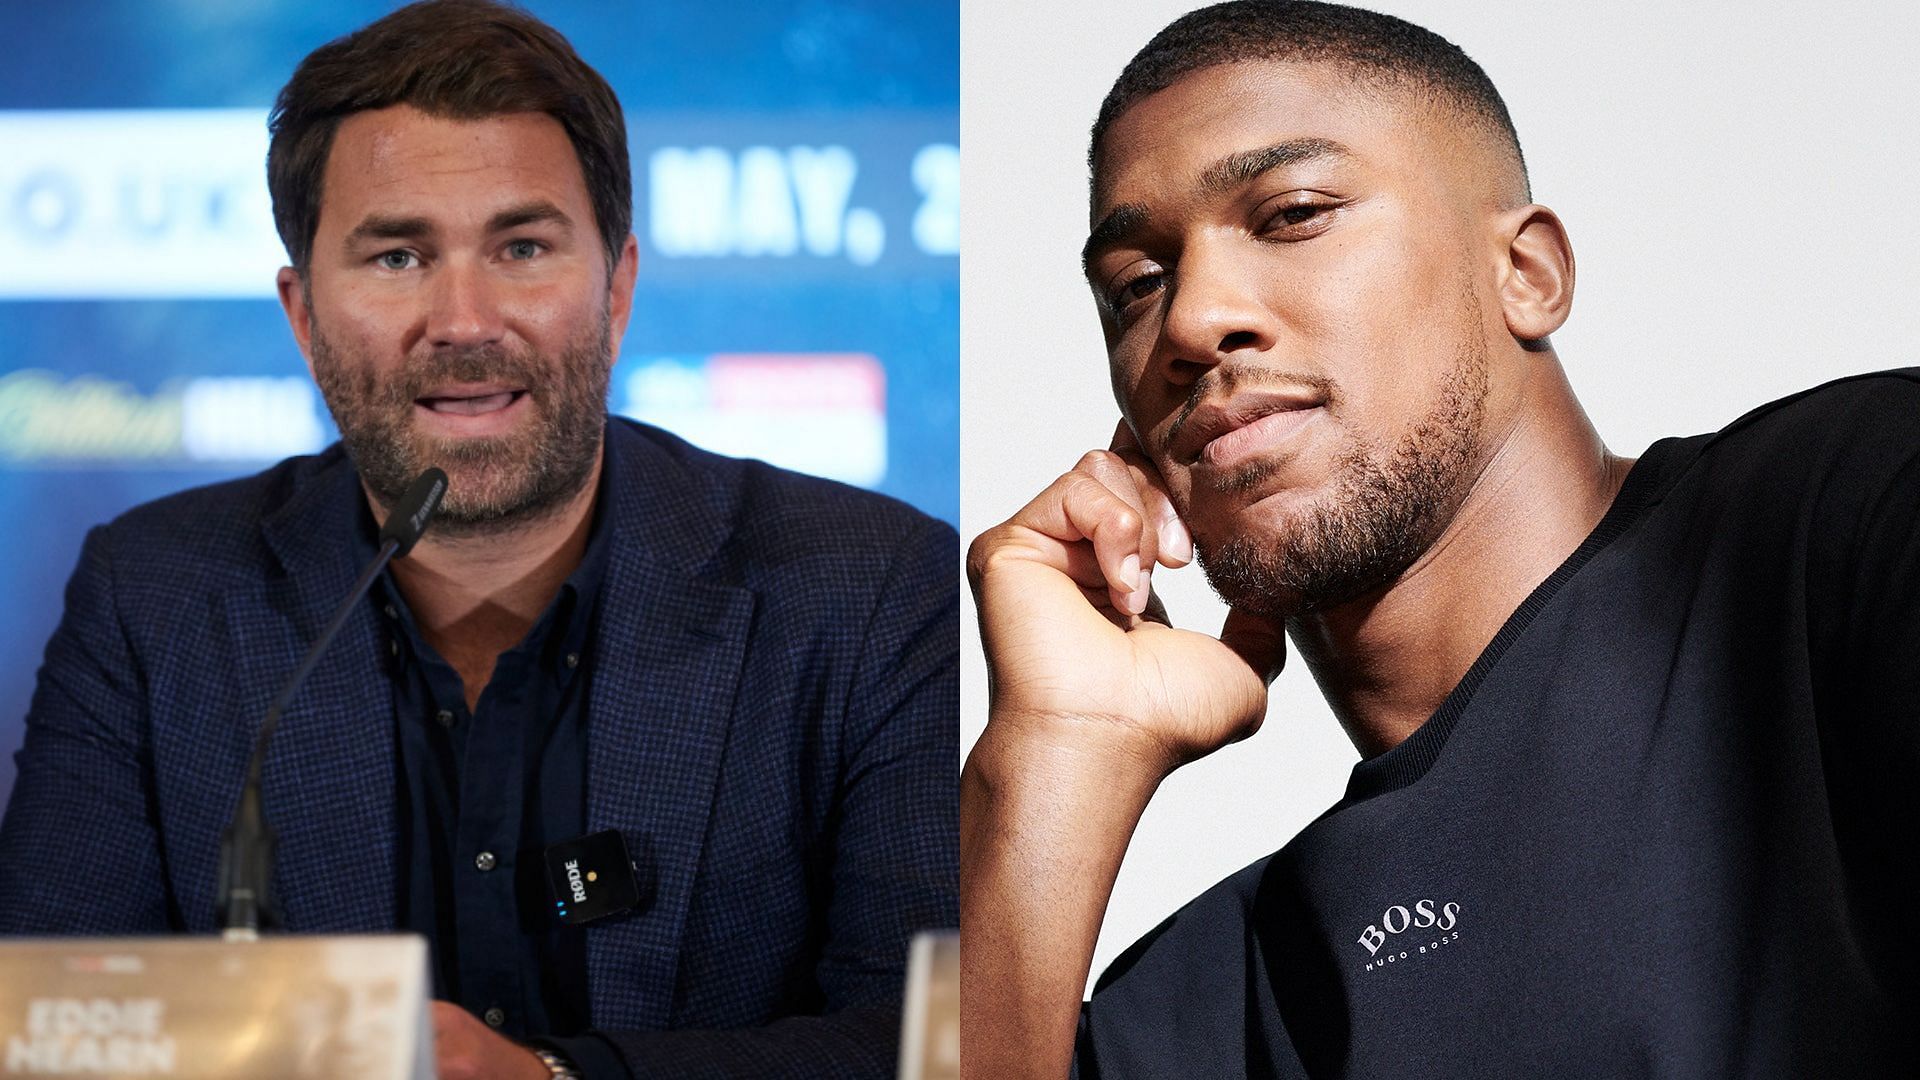 Eddie Hearn (left) and Anthony Joshua (right)